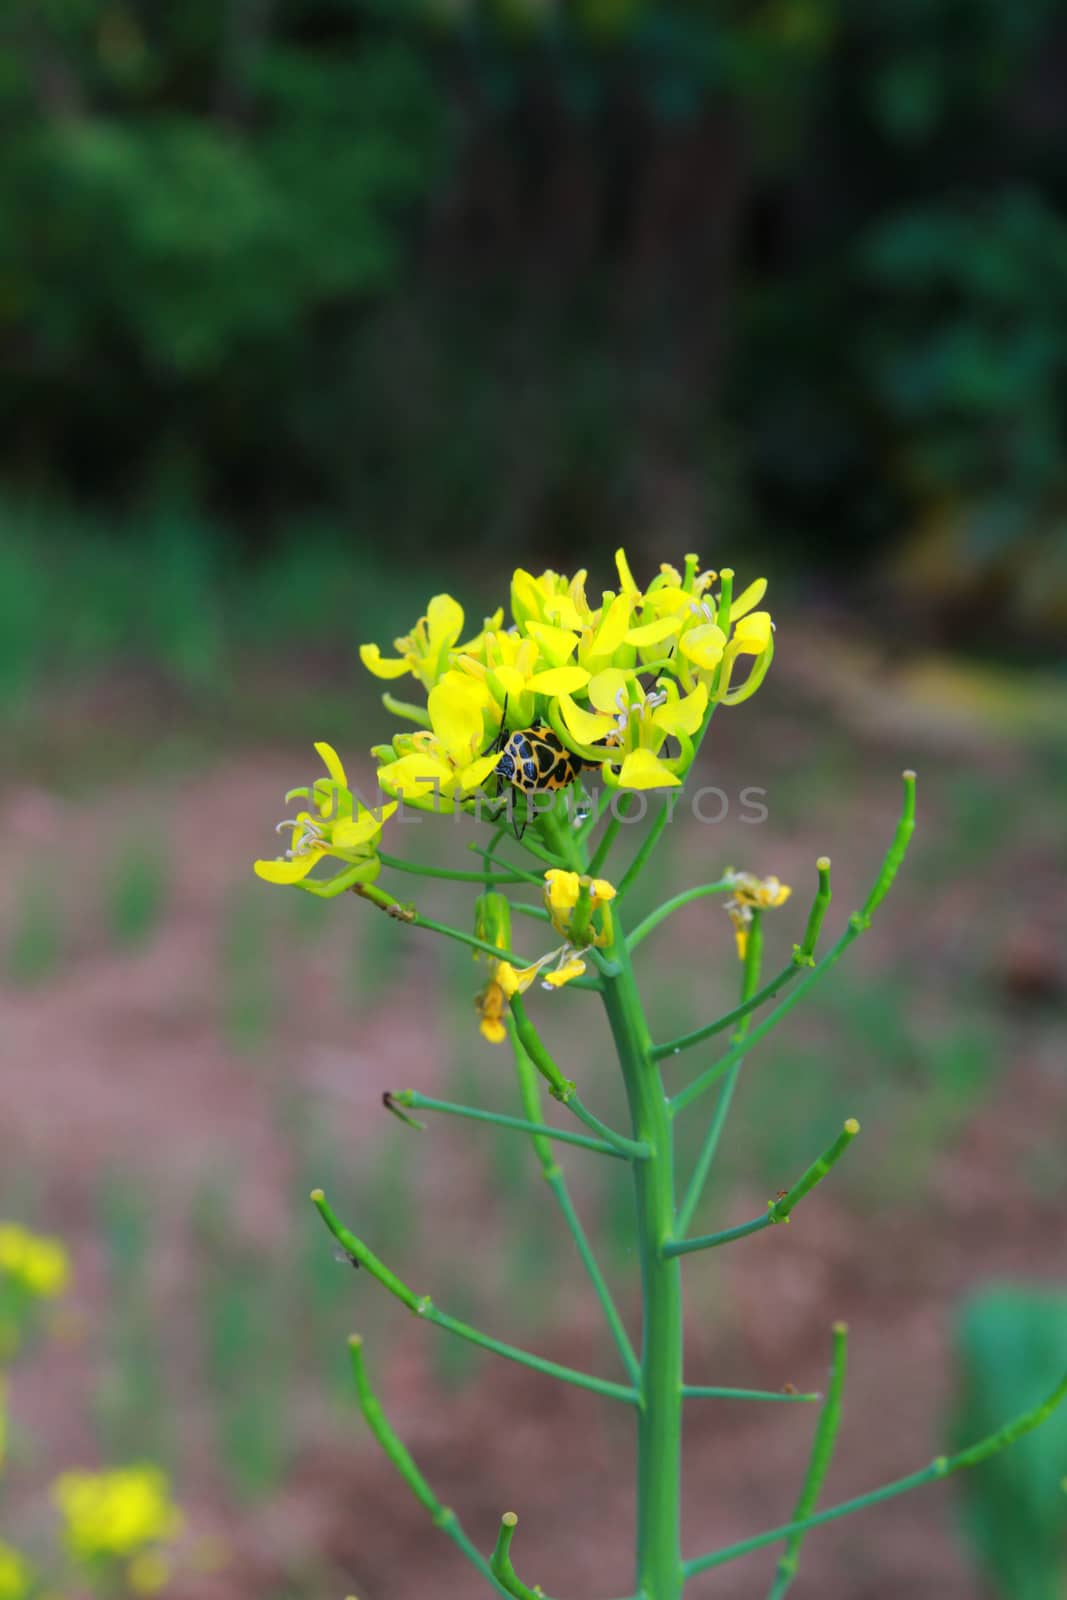 The flower of the mustard blooming and insect hiding in them.